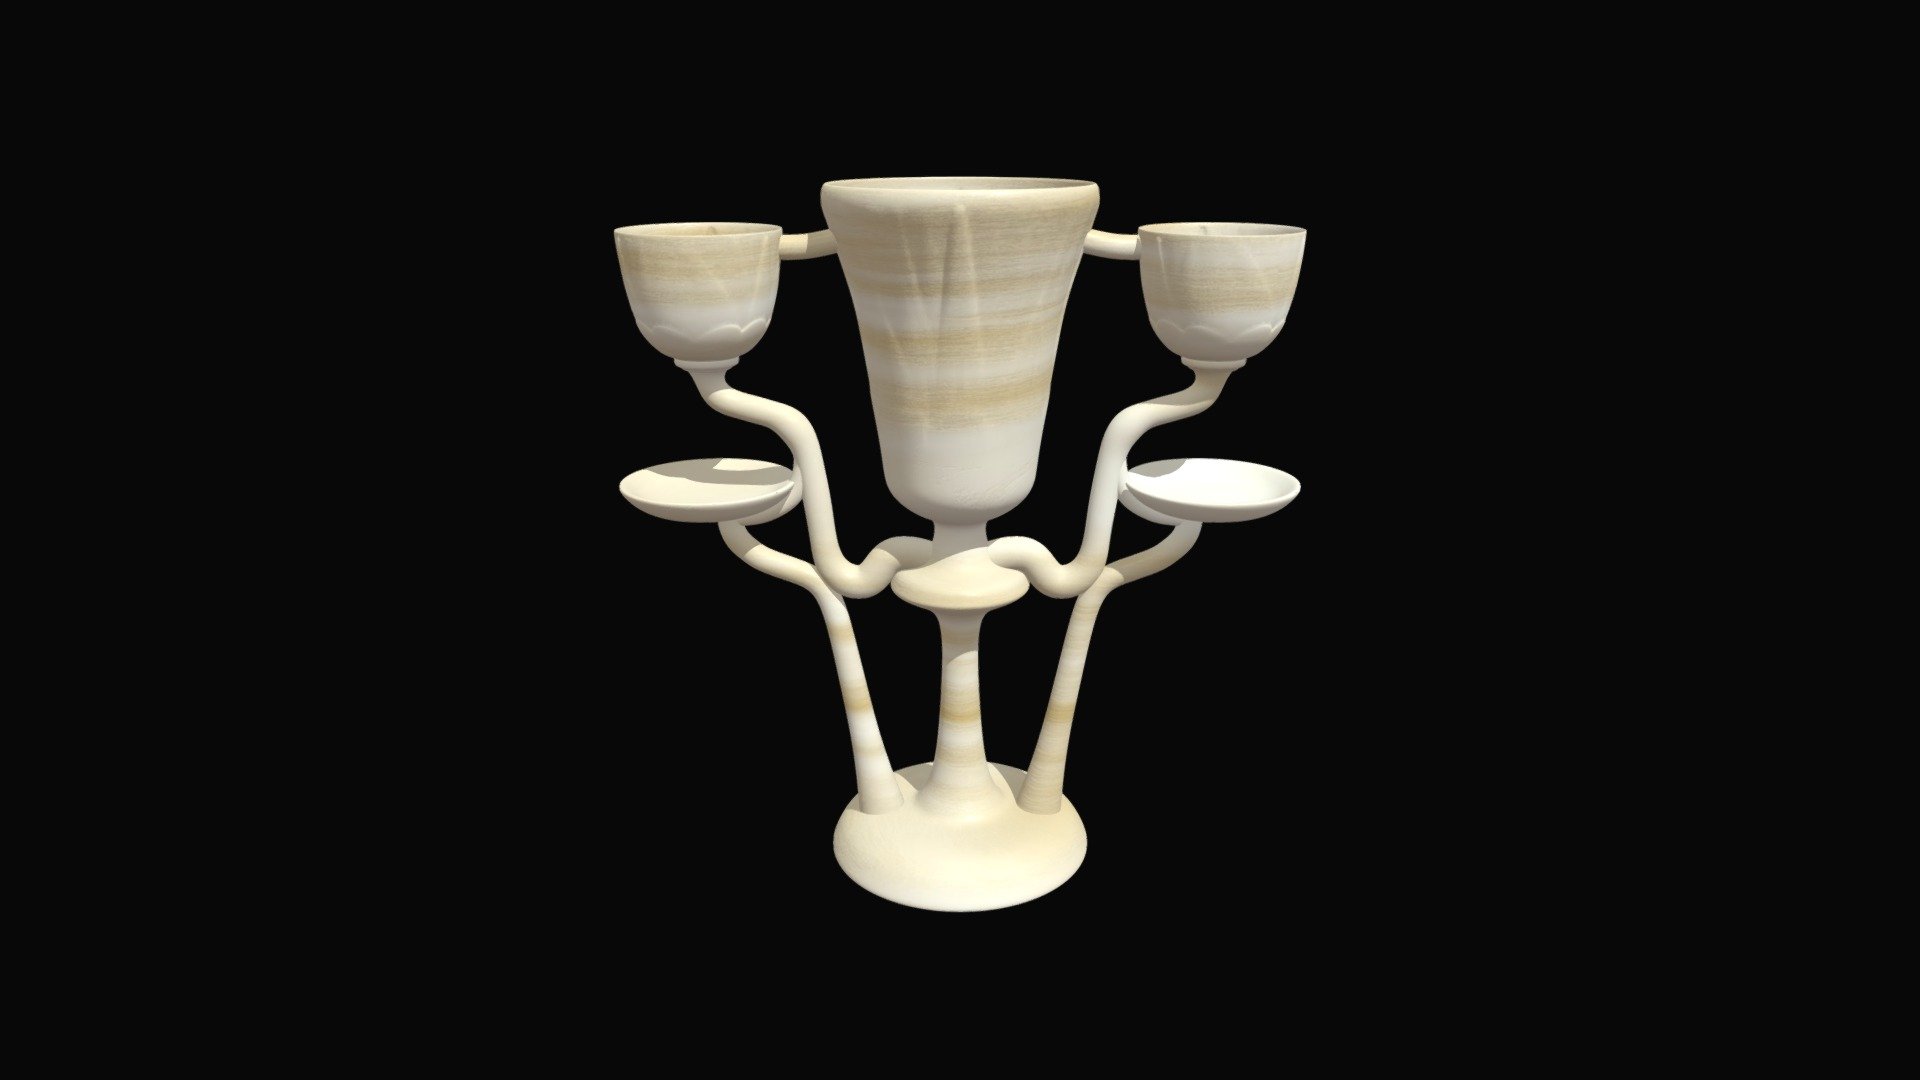 3D model of triple lotus lamp from the tomb of Tutankhamun made in Blender 3.0. Rendering in cycles. Photographs of the artifact were used as reference in modeling. PBR textures of alabaster 3d model